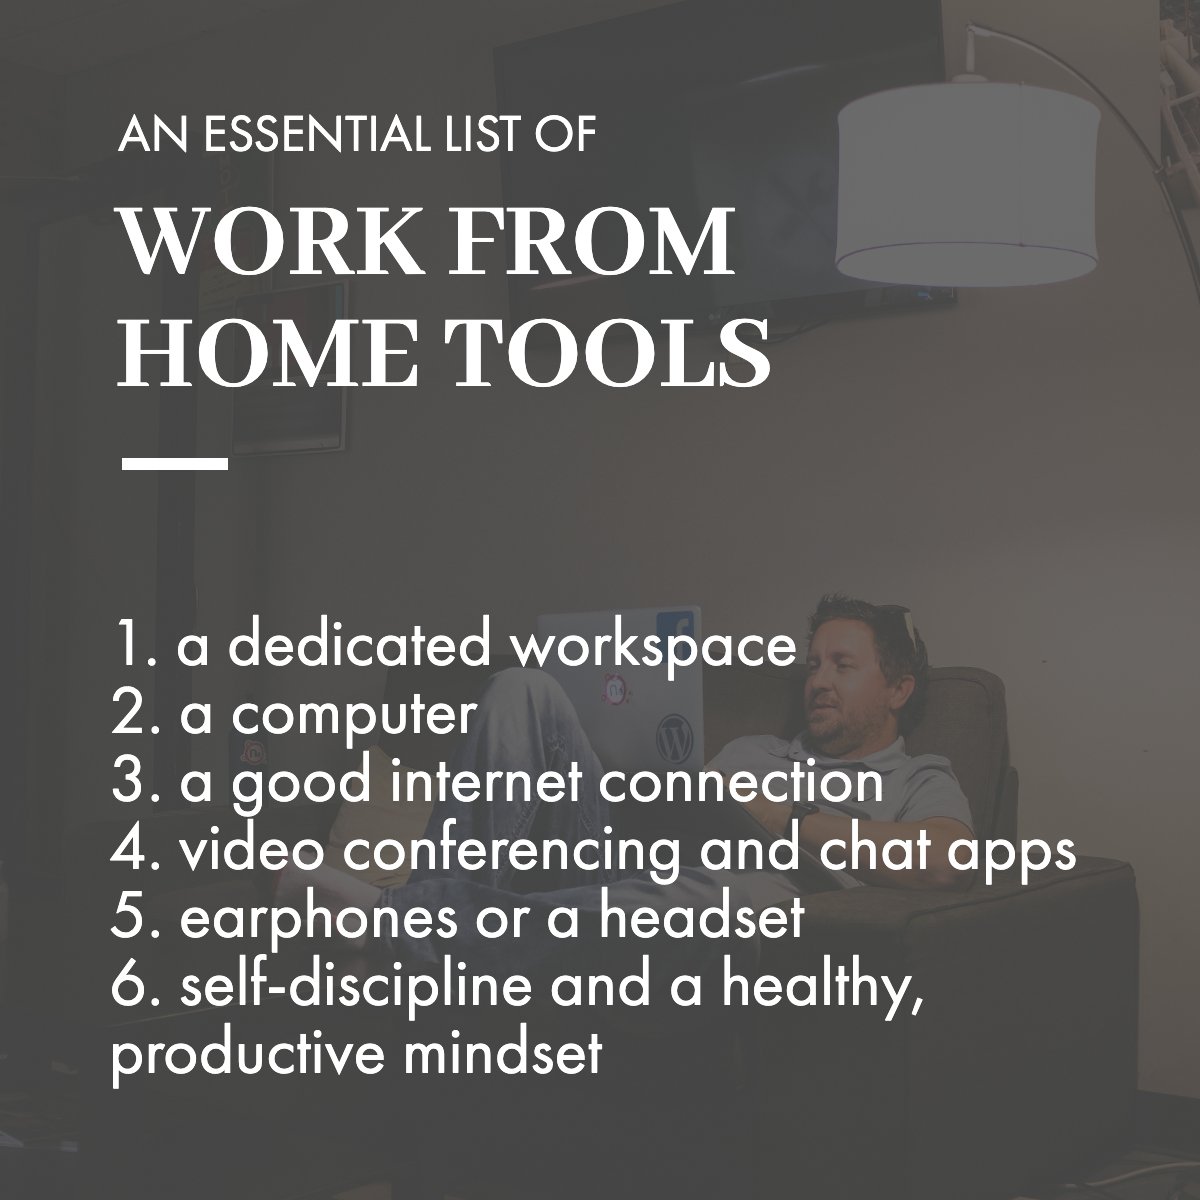 Check the list for essentials to work from home 💻

#workfromhome #workathome #homelifestyle #homestudio #remotelife